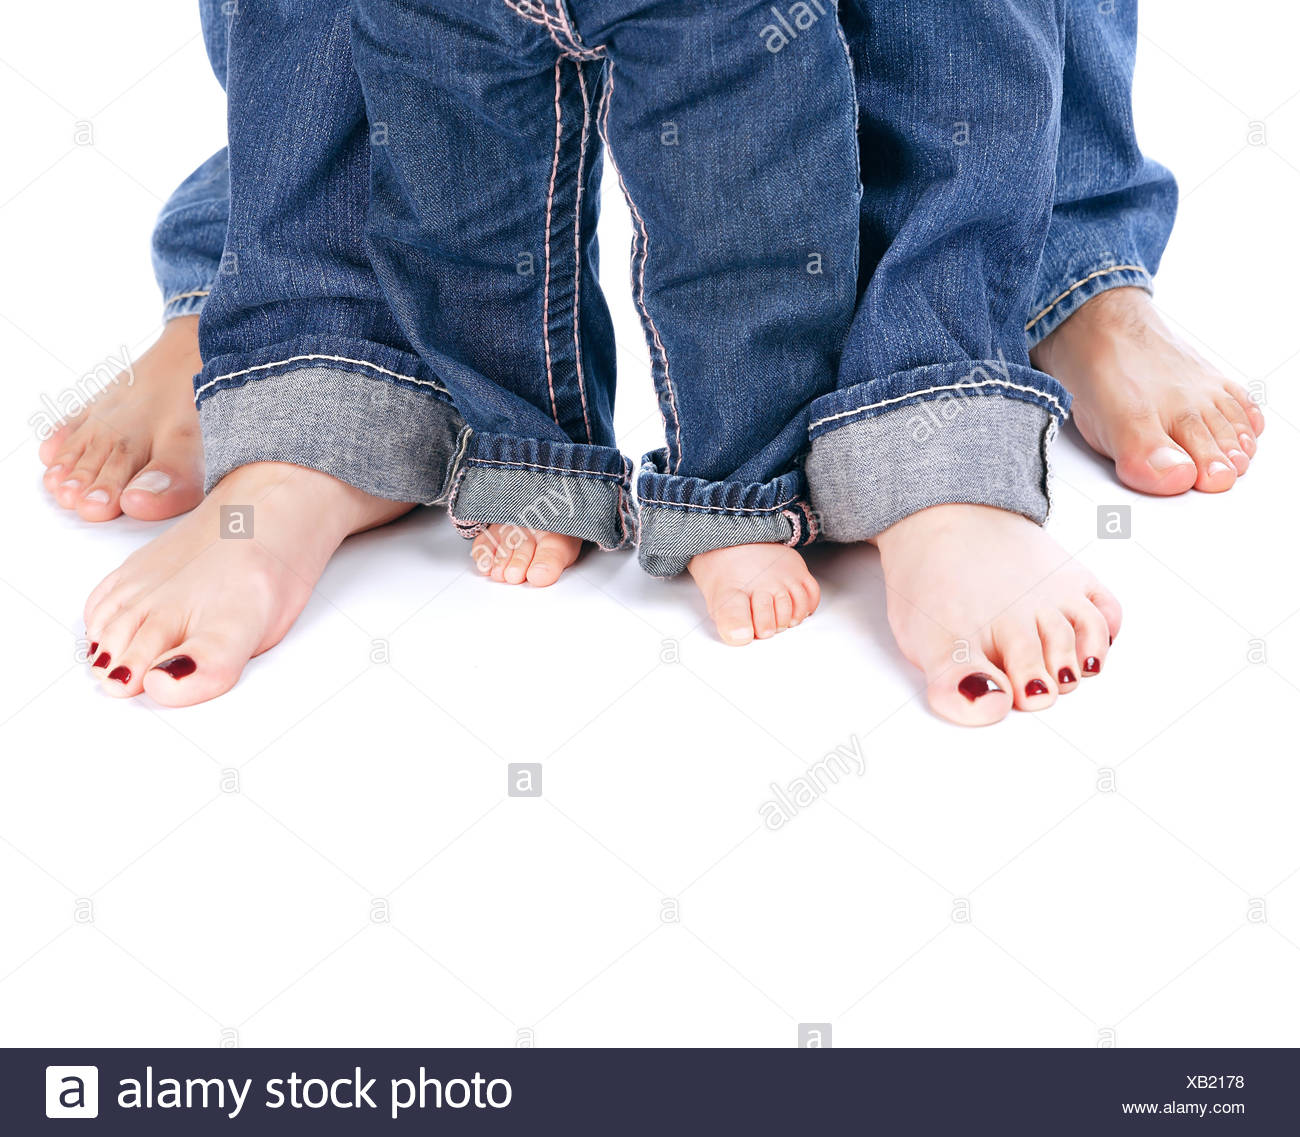 Family unity abstract border barefoot people legs isolated on